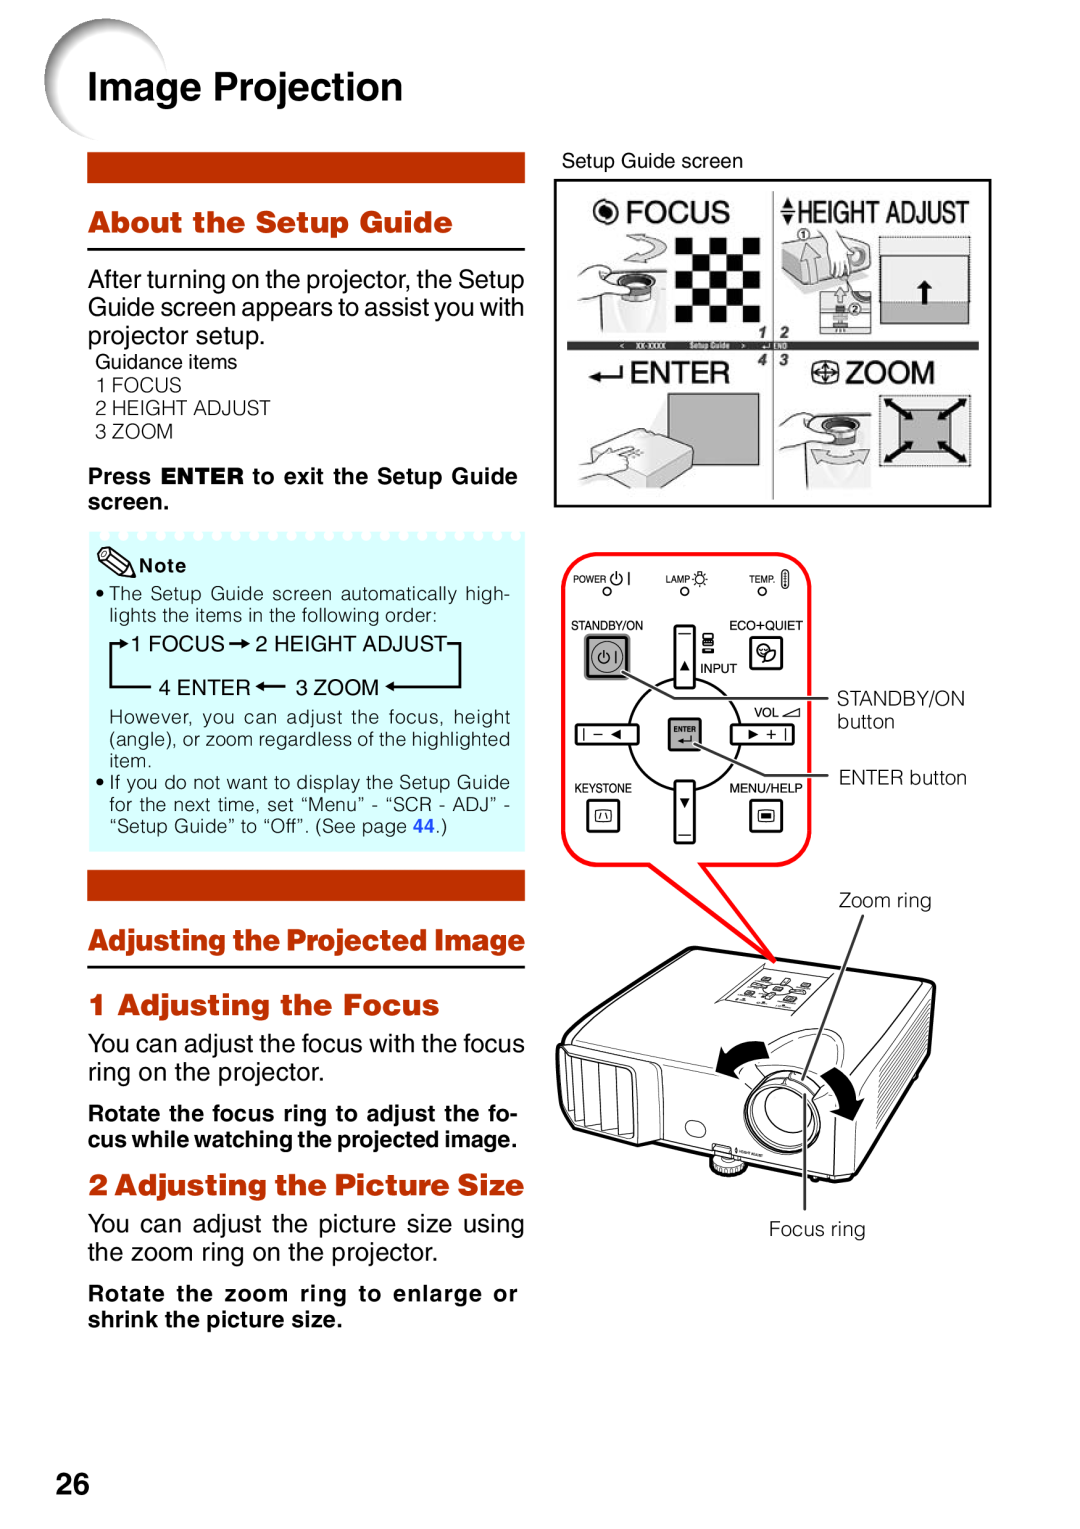 Sharp XR-32X quick start Image Projection, About the Setup Guide, Adjusting the Projected Image 1 Adjusting the Focus 